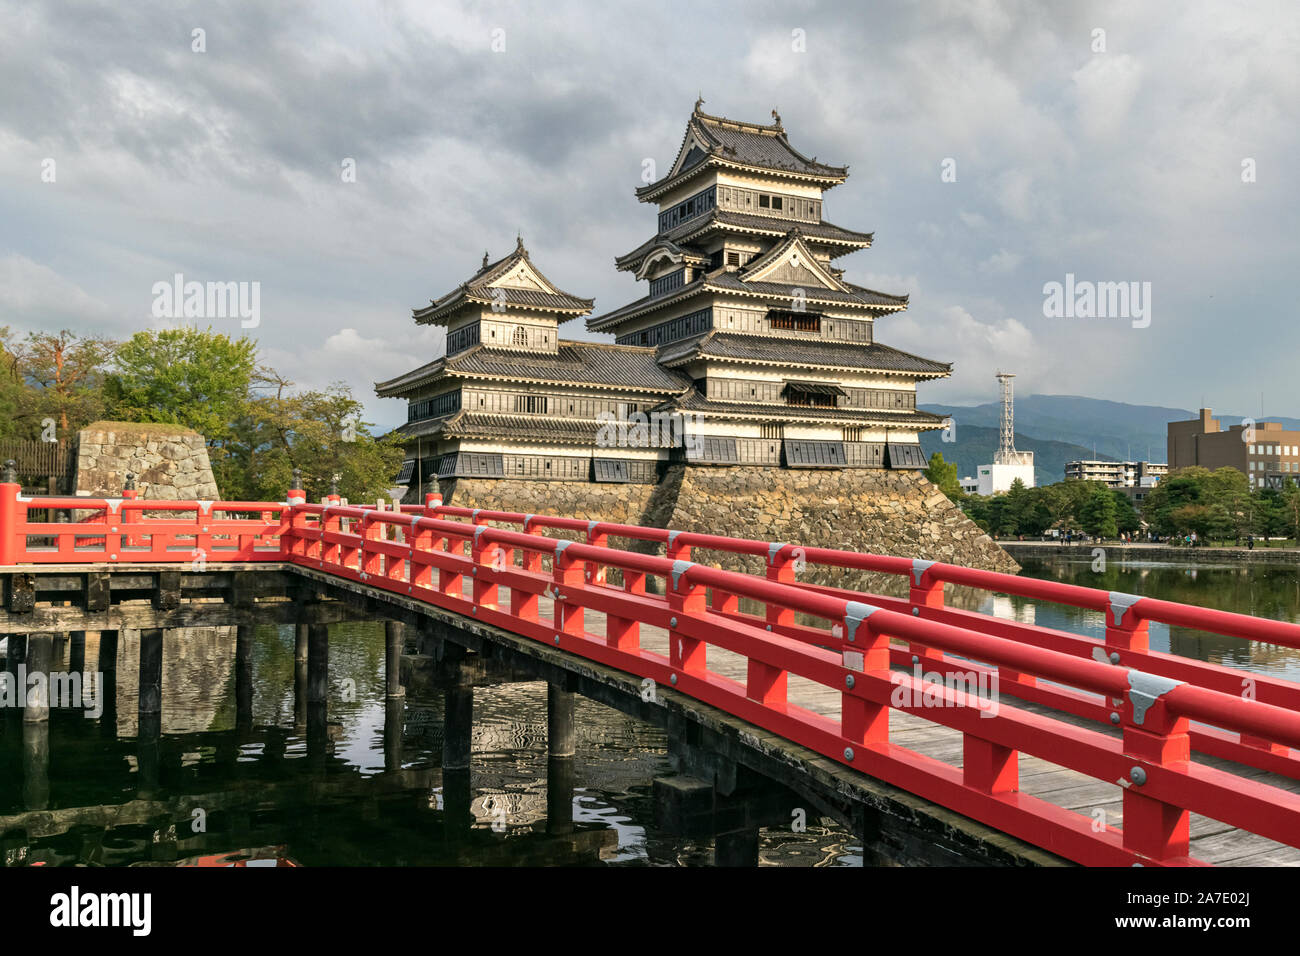 Matsumoto Castle (Crow Castle) with red bridge over the moat. Matsumoto Castle is one of Japan's most important historic castles. Stock Photo